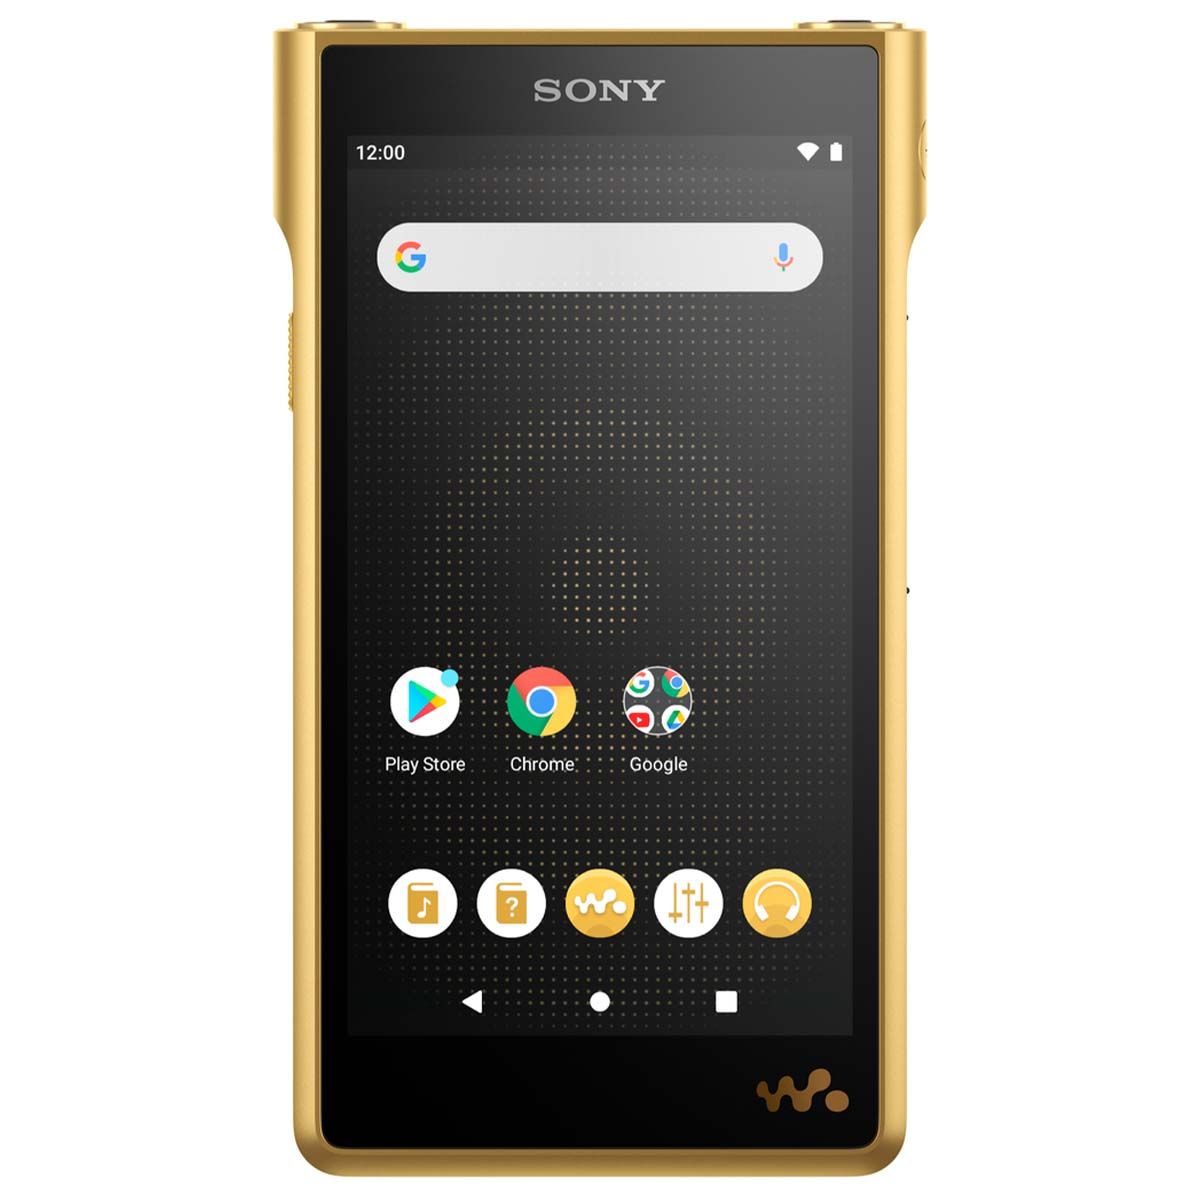 Sony Walkman WM1ZM2 - Signature Series Digital Player - Android 11 - front view with home screen